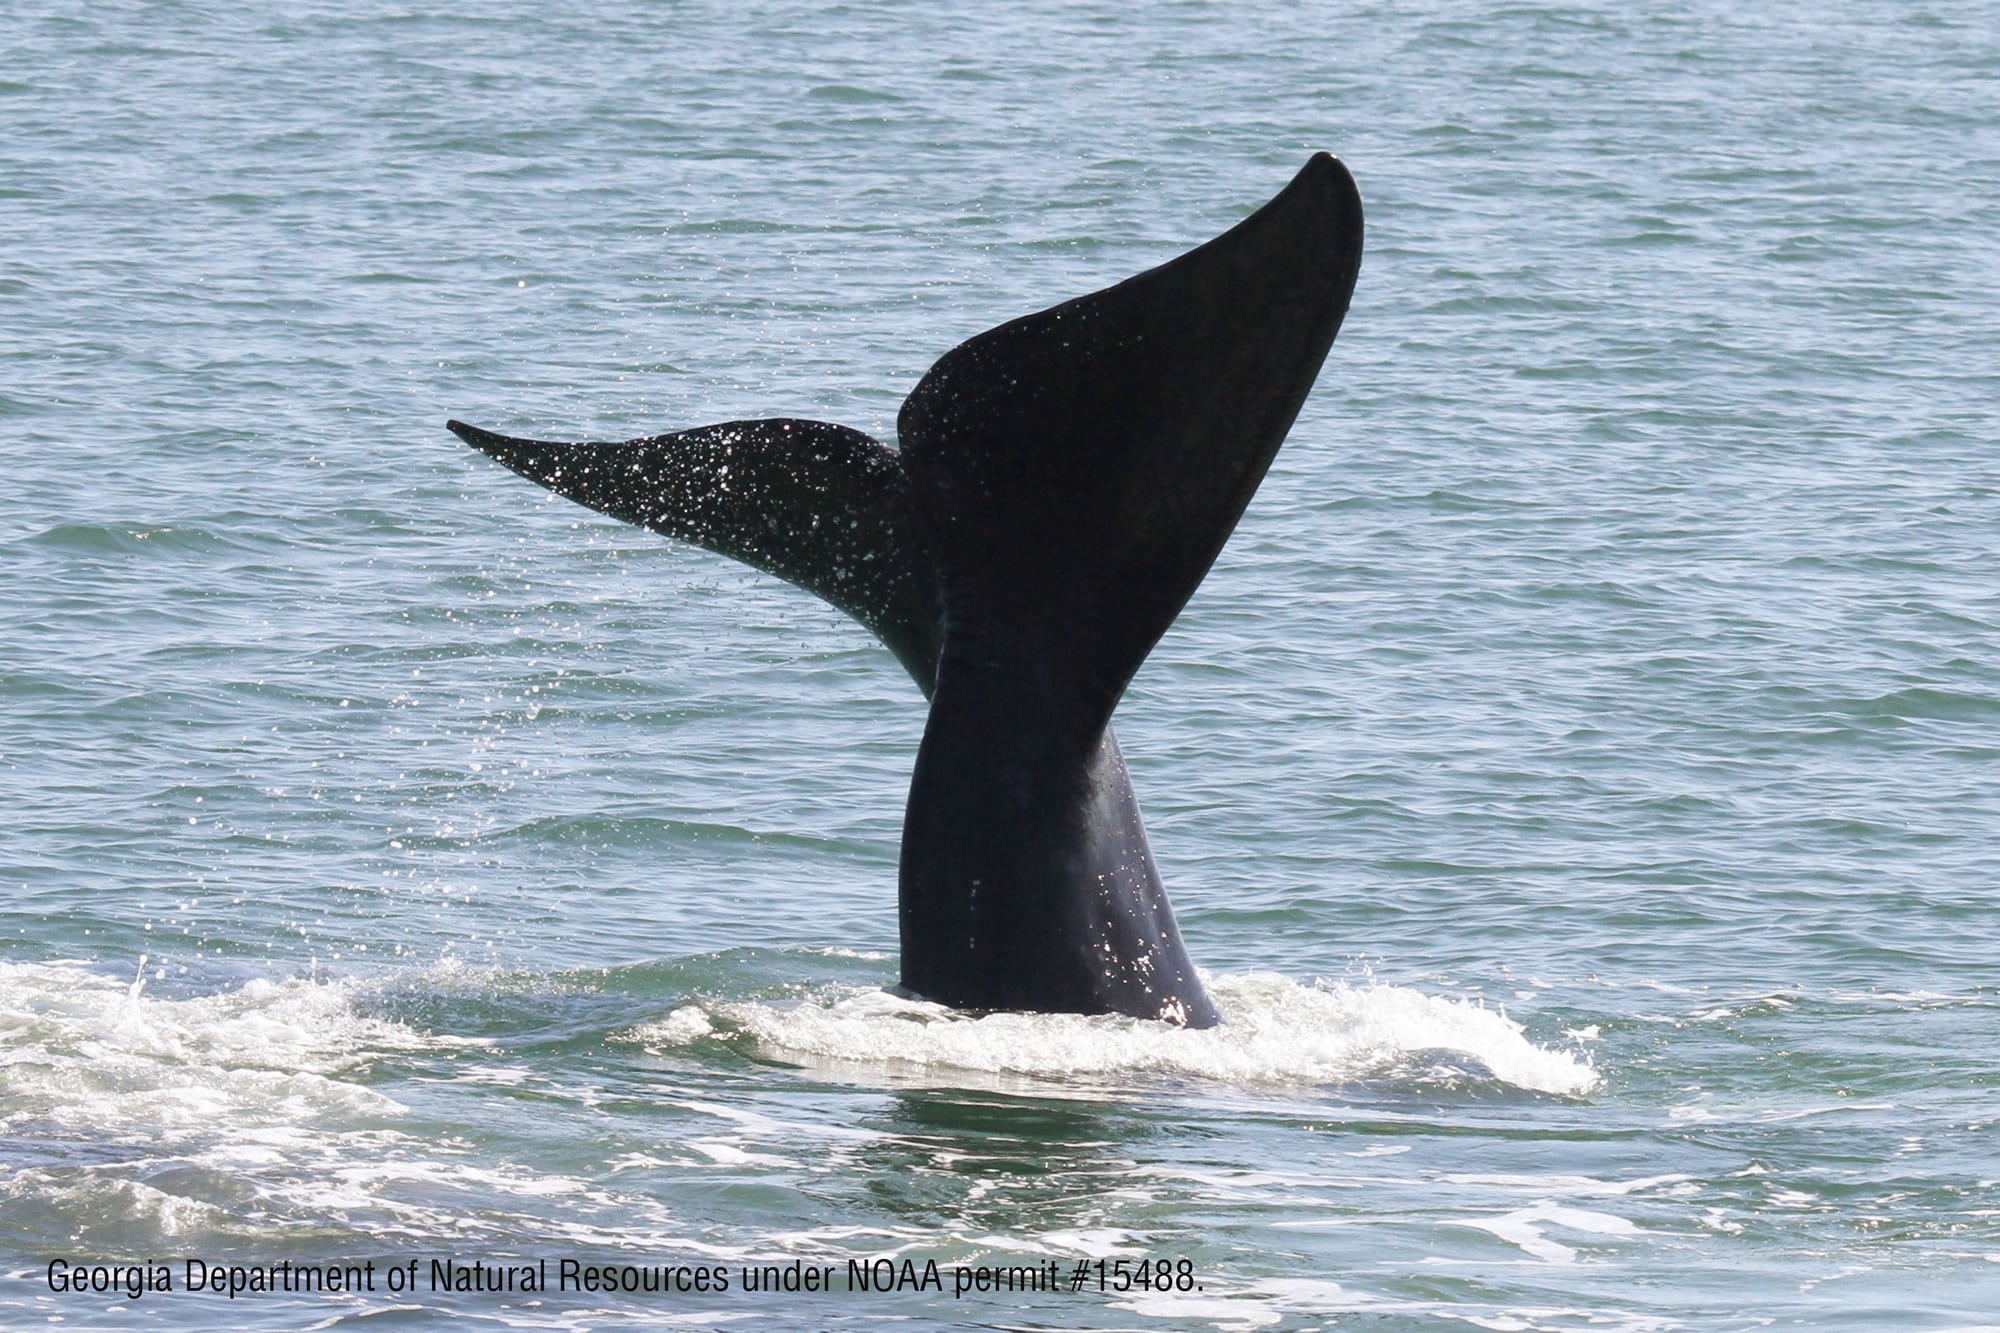 North Atlantic right whale fluking